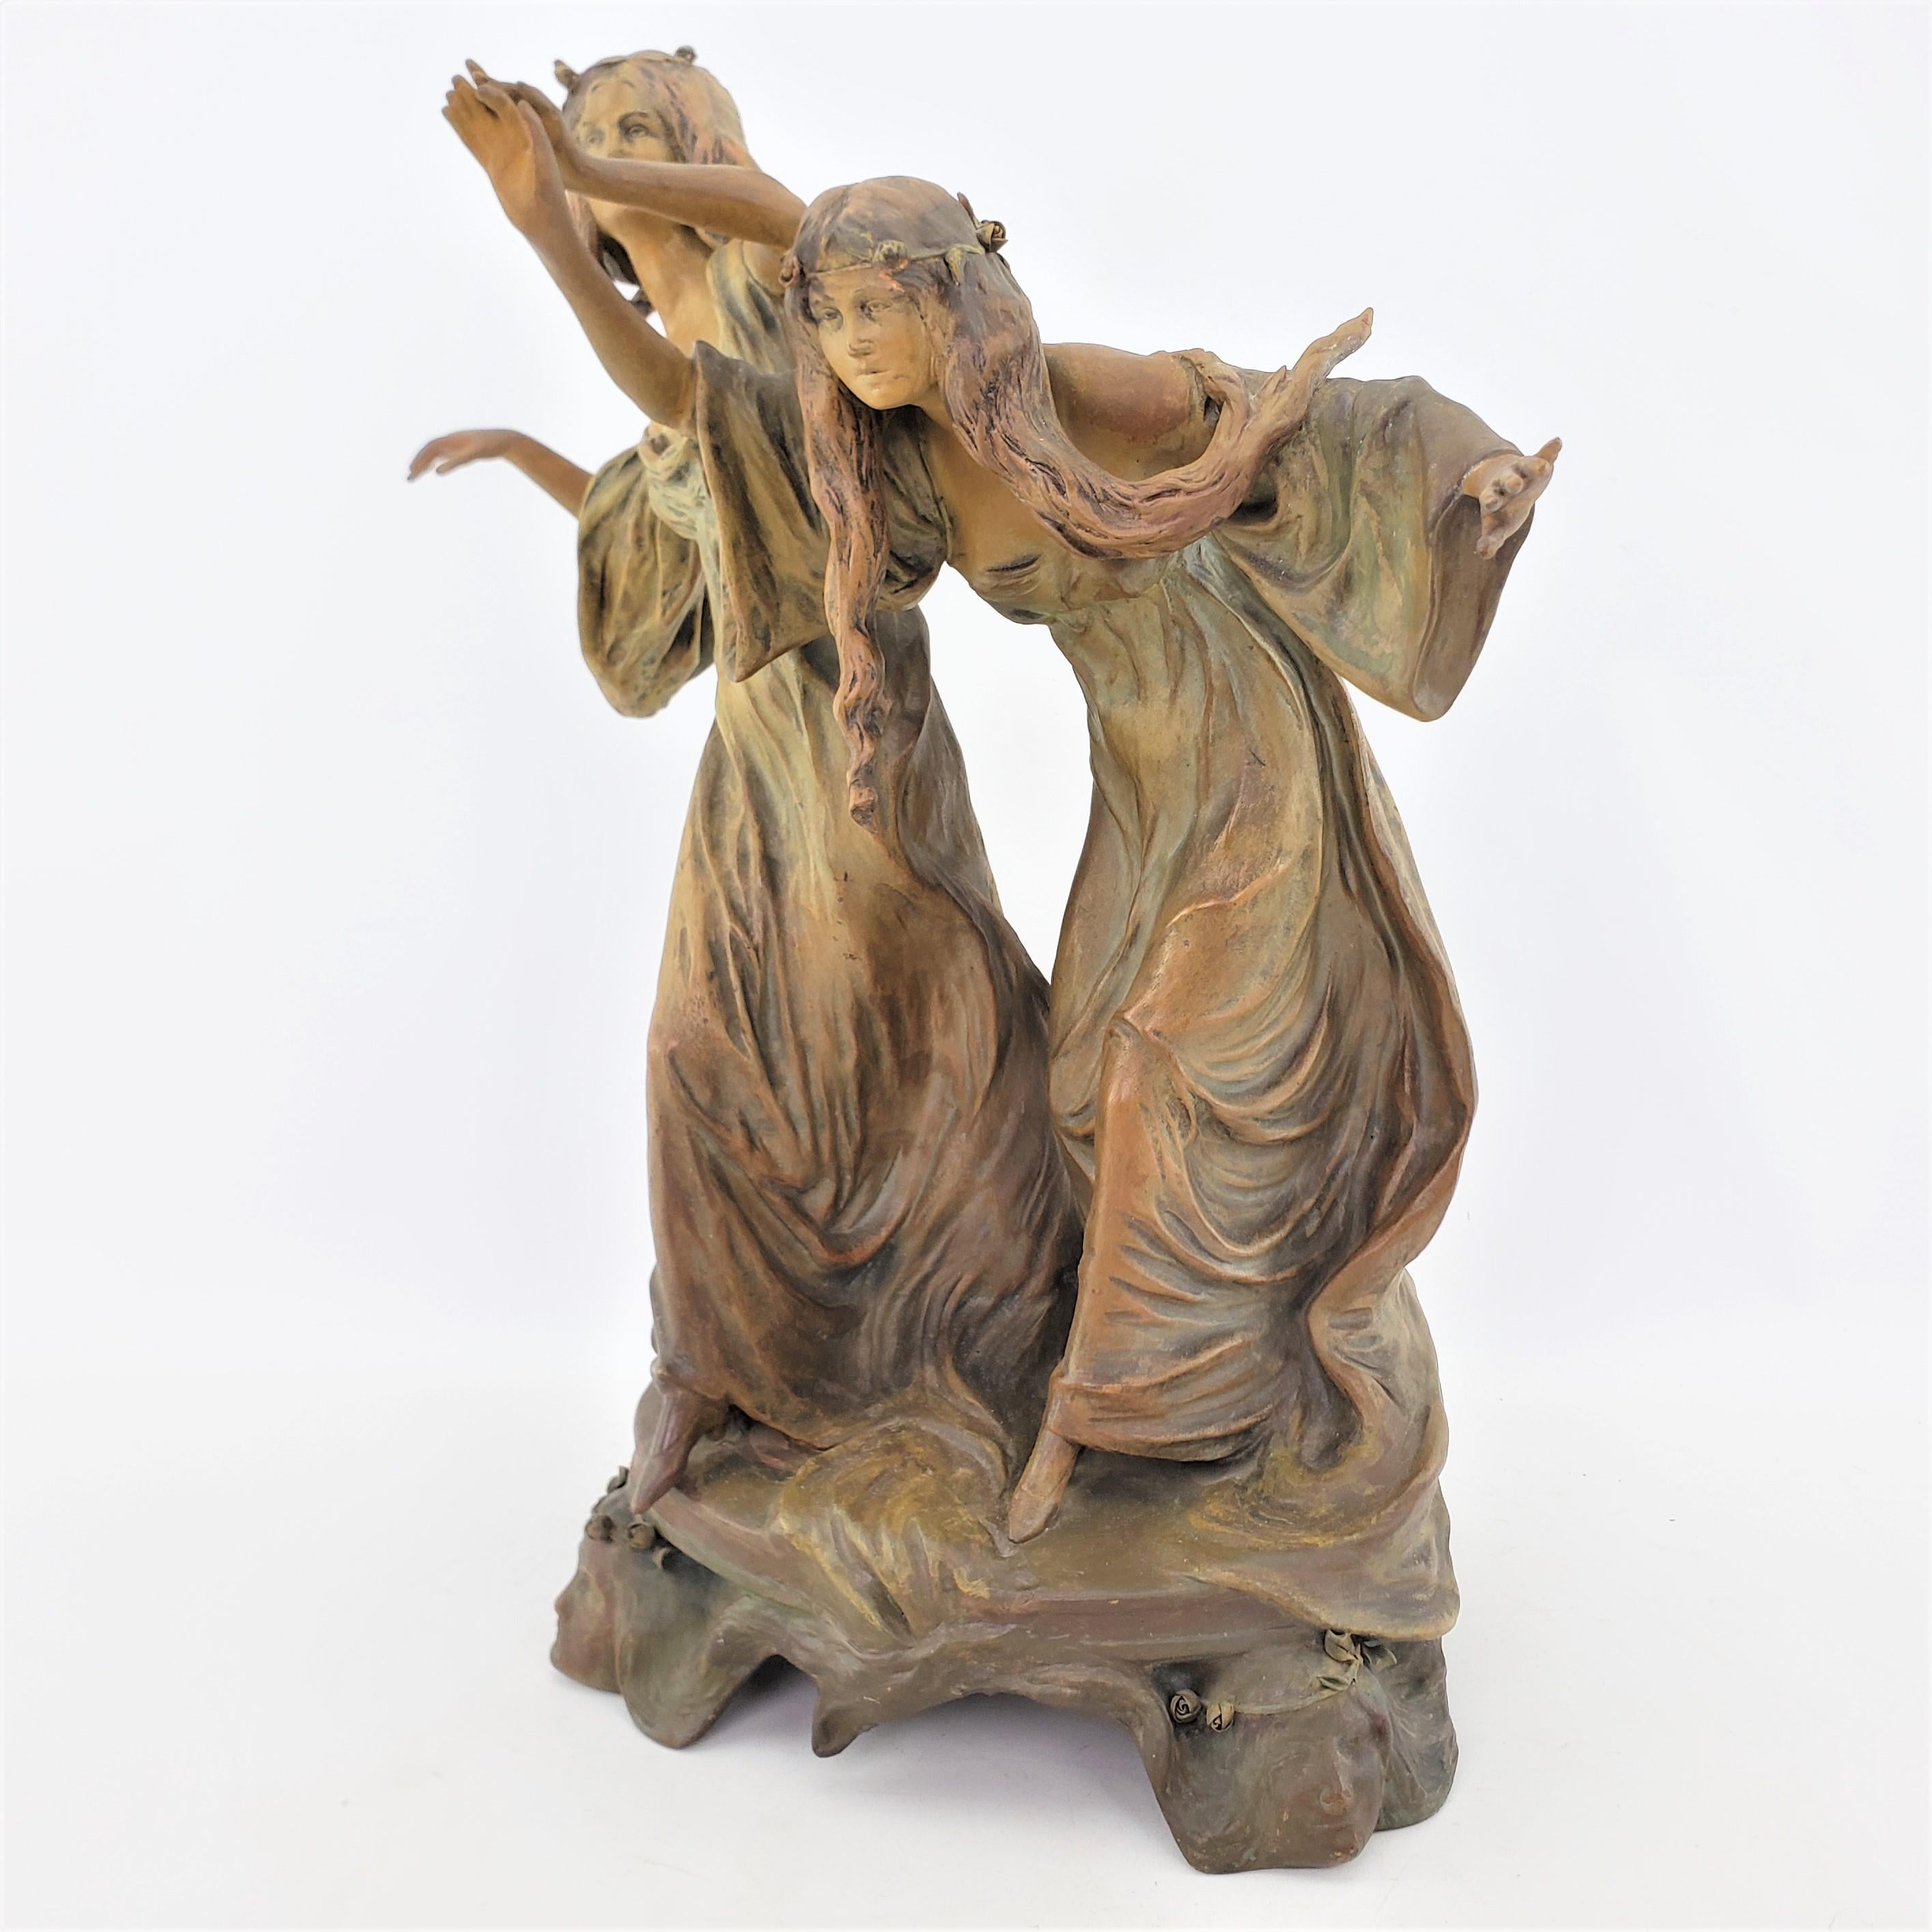 This large antique sculpture is possibly signed by an unknown artist, or titled and originated from Austria and dating to approximately 1890 and done in the period Art Nouveau style. The sculpture is composed of terracotta which has been patinated